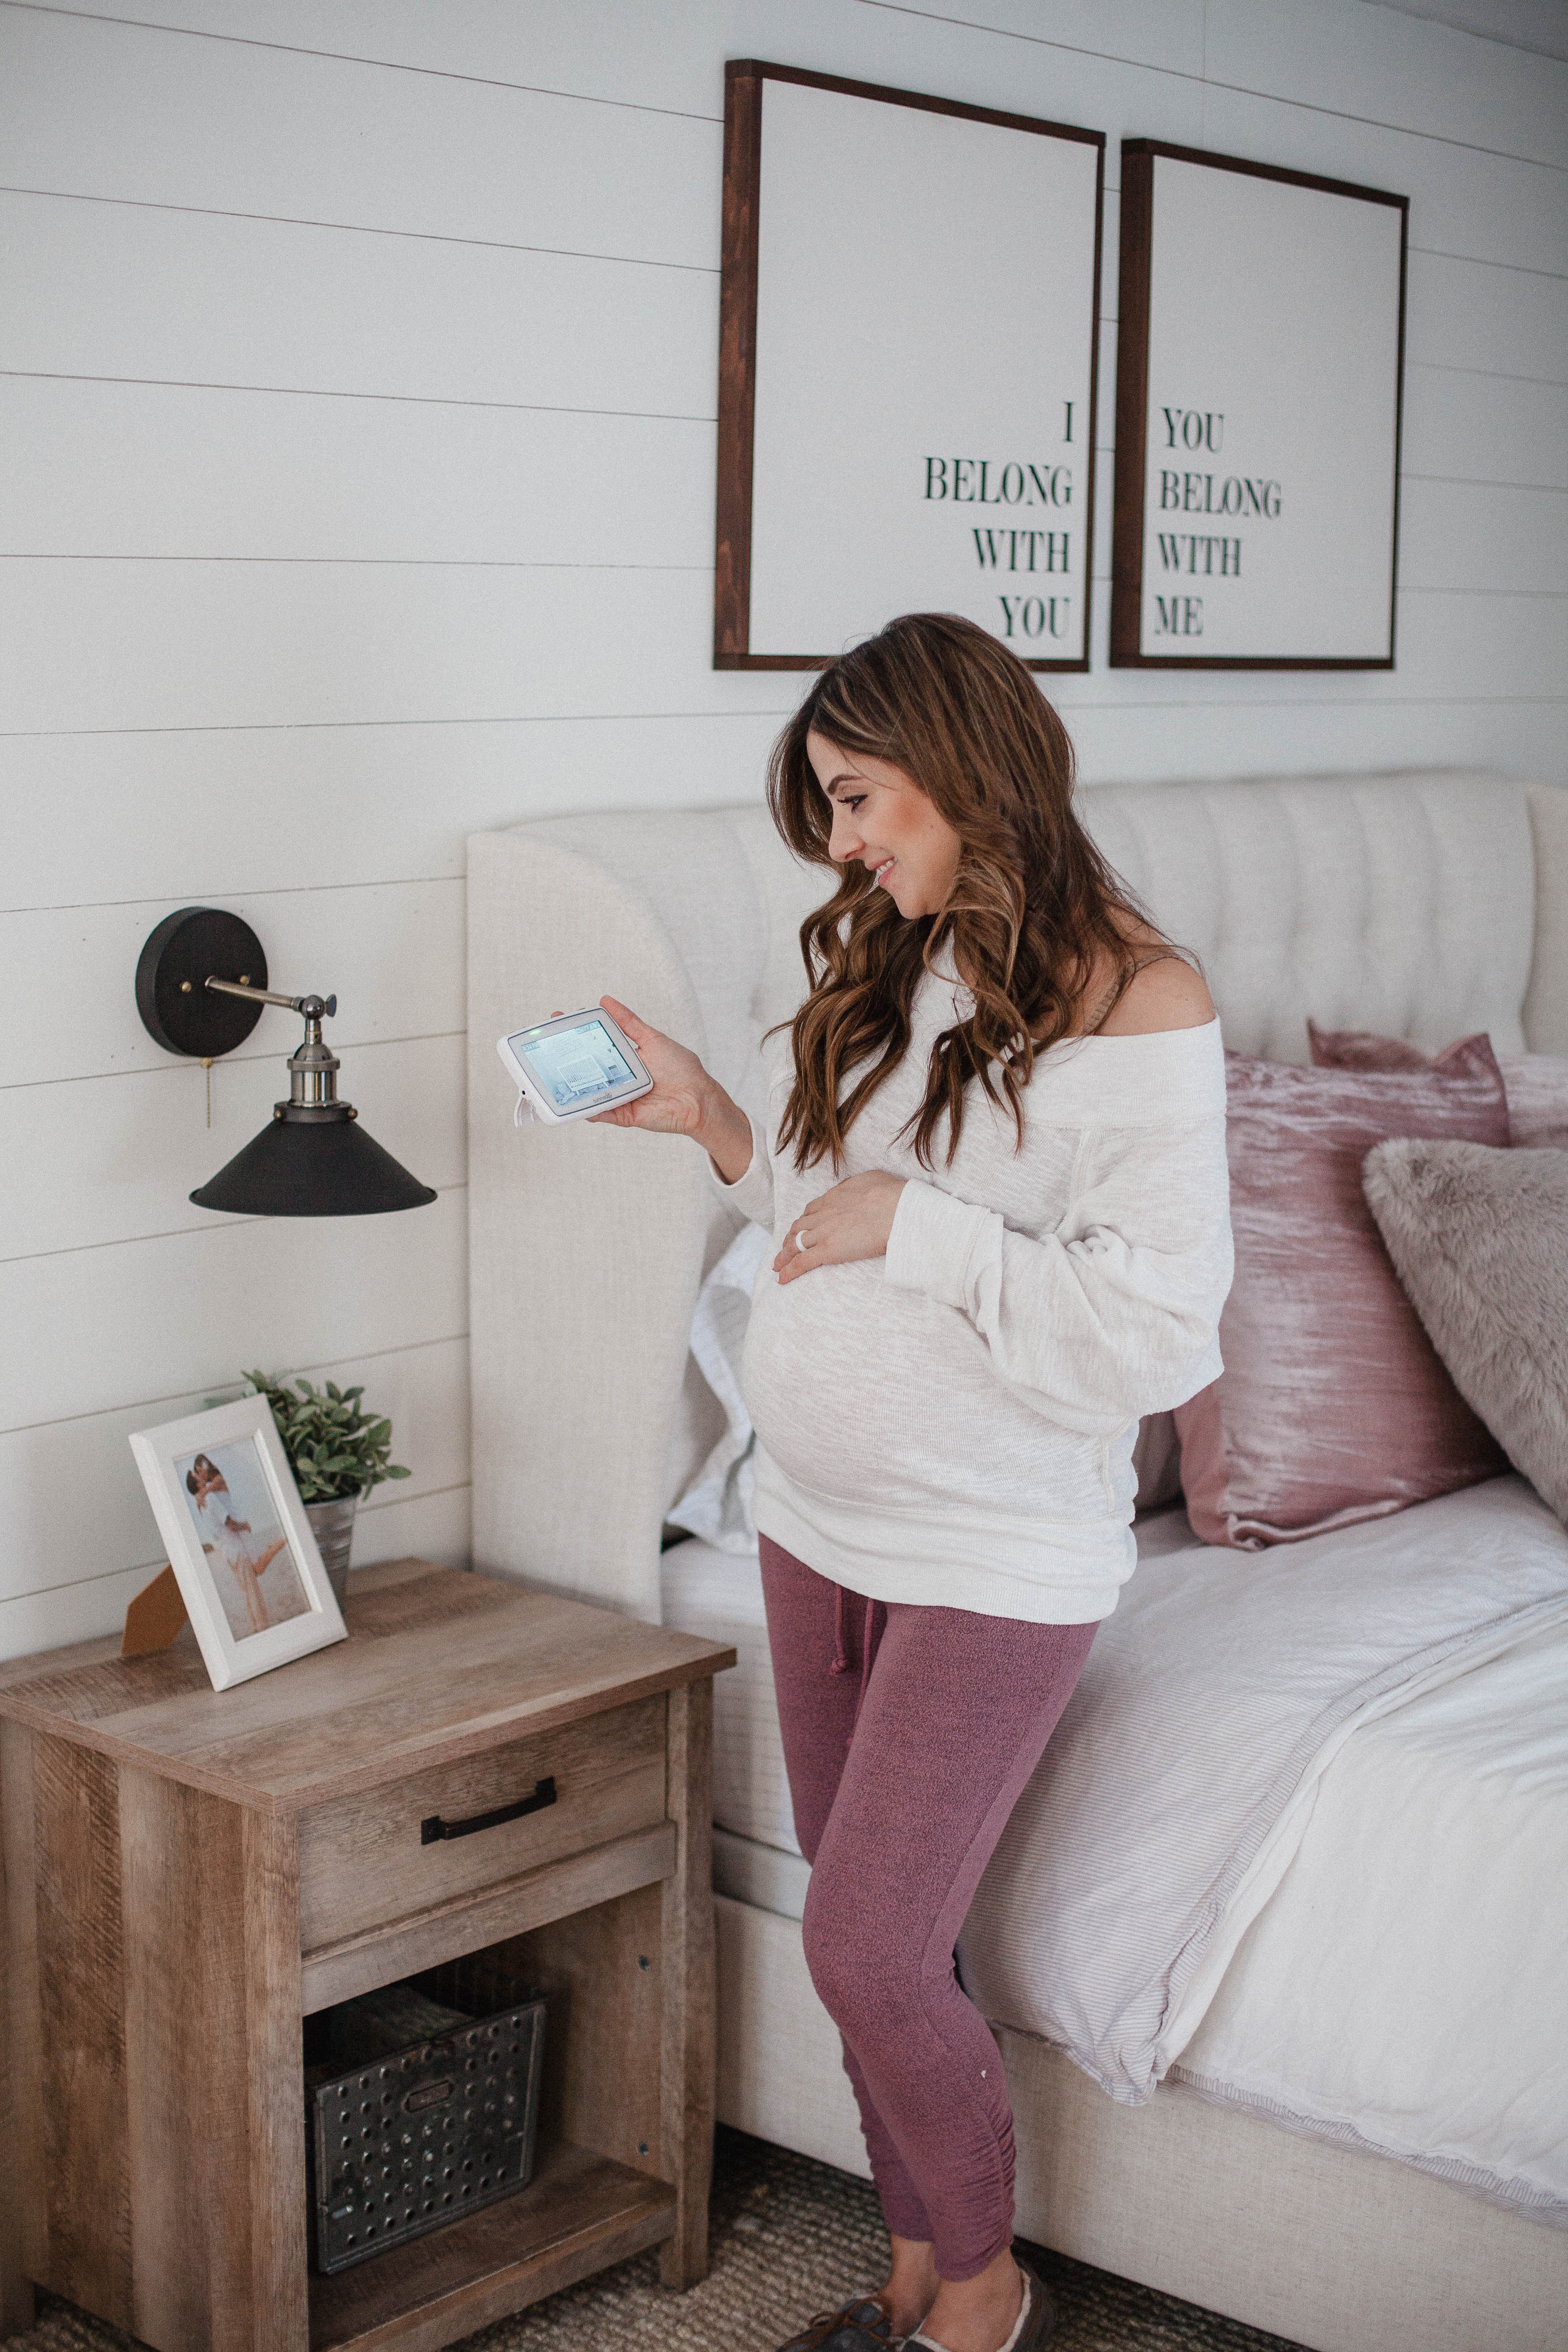 Life and style blogger Lauren McBride shares her Must-Have Baby Items that every new parent should have as a mom of almost 3.